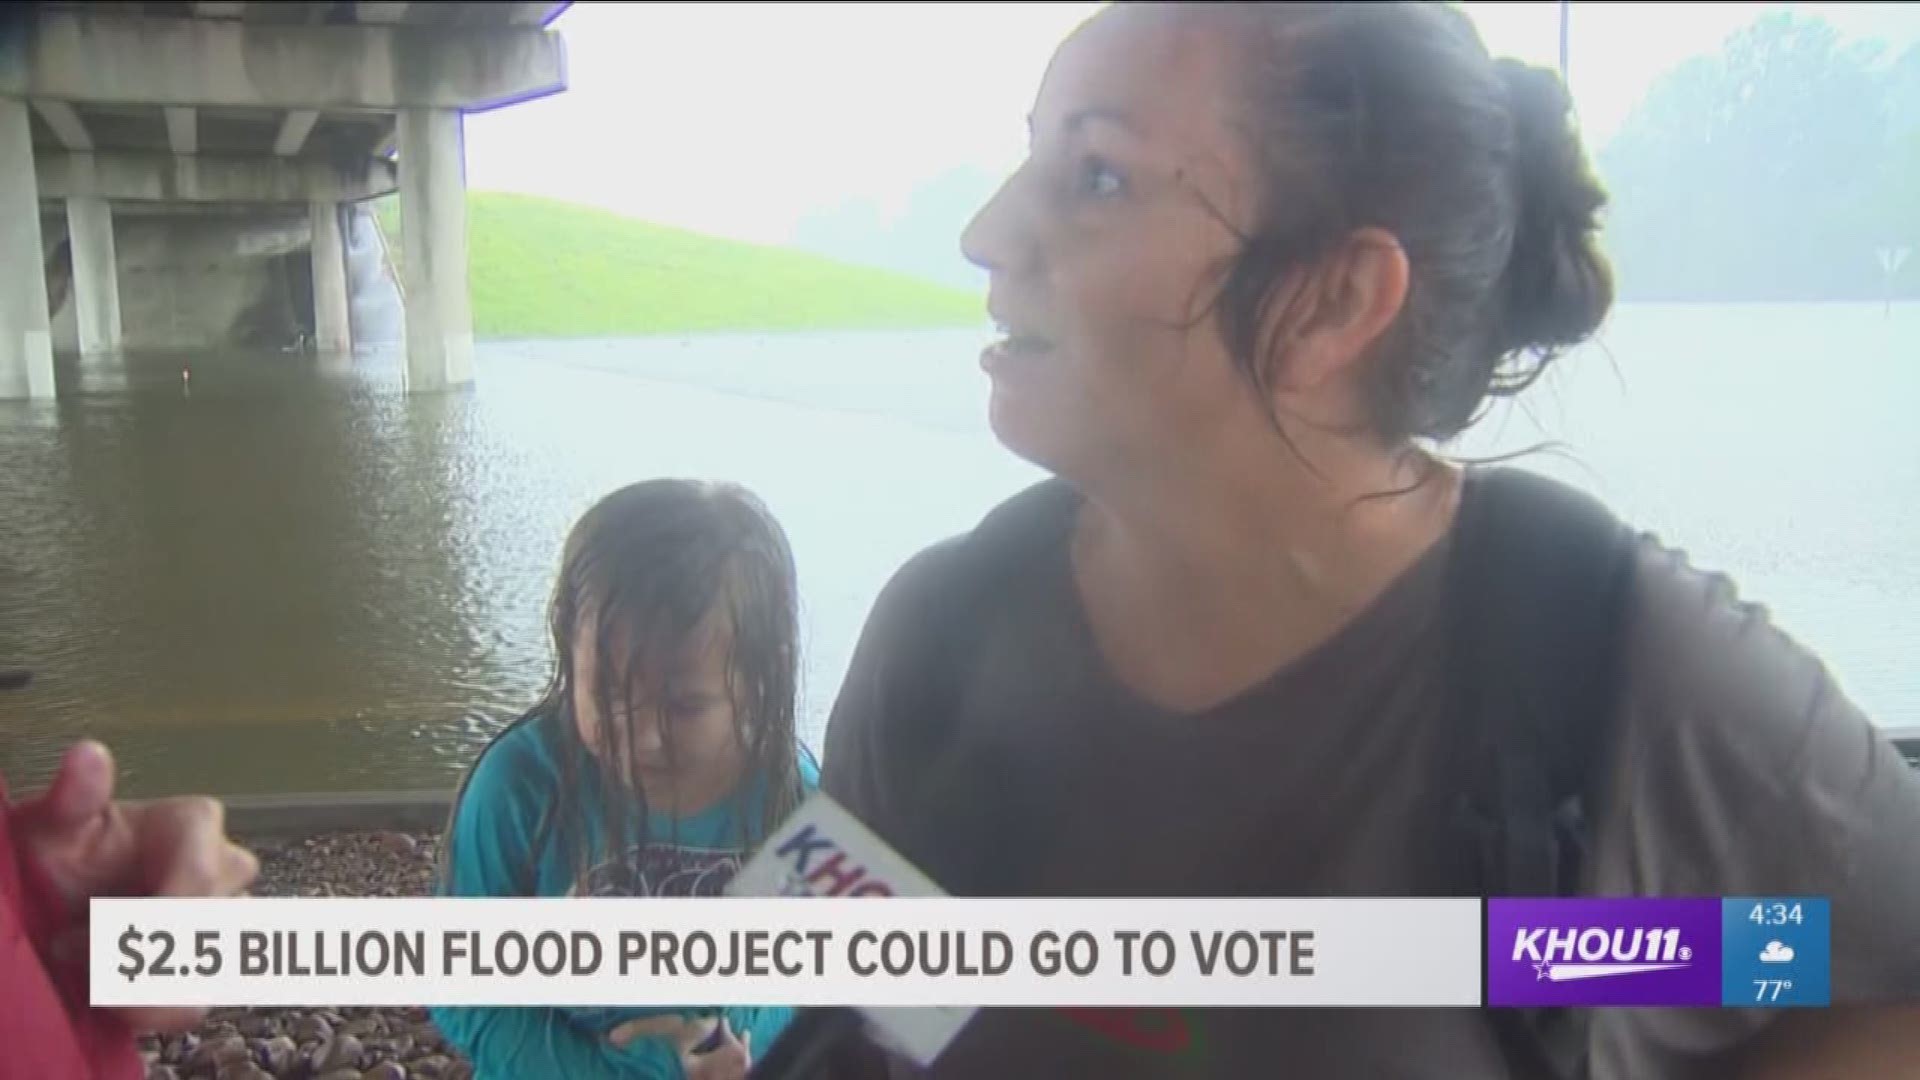 Harris County voters could soon decide whether to spend up to $2.5 billion on flood control projects.